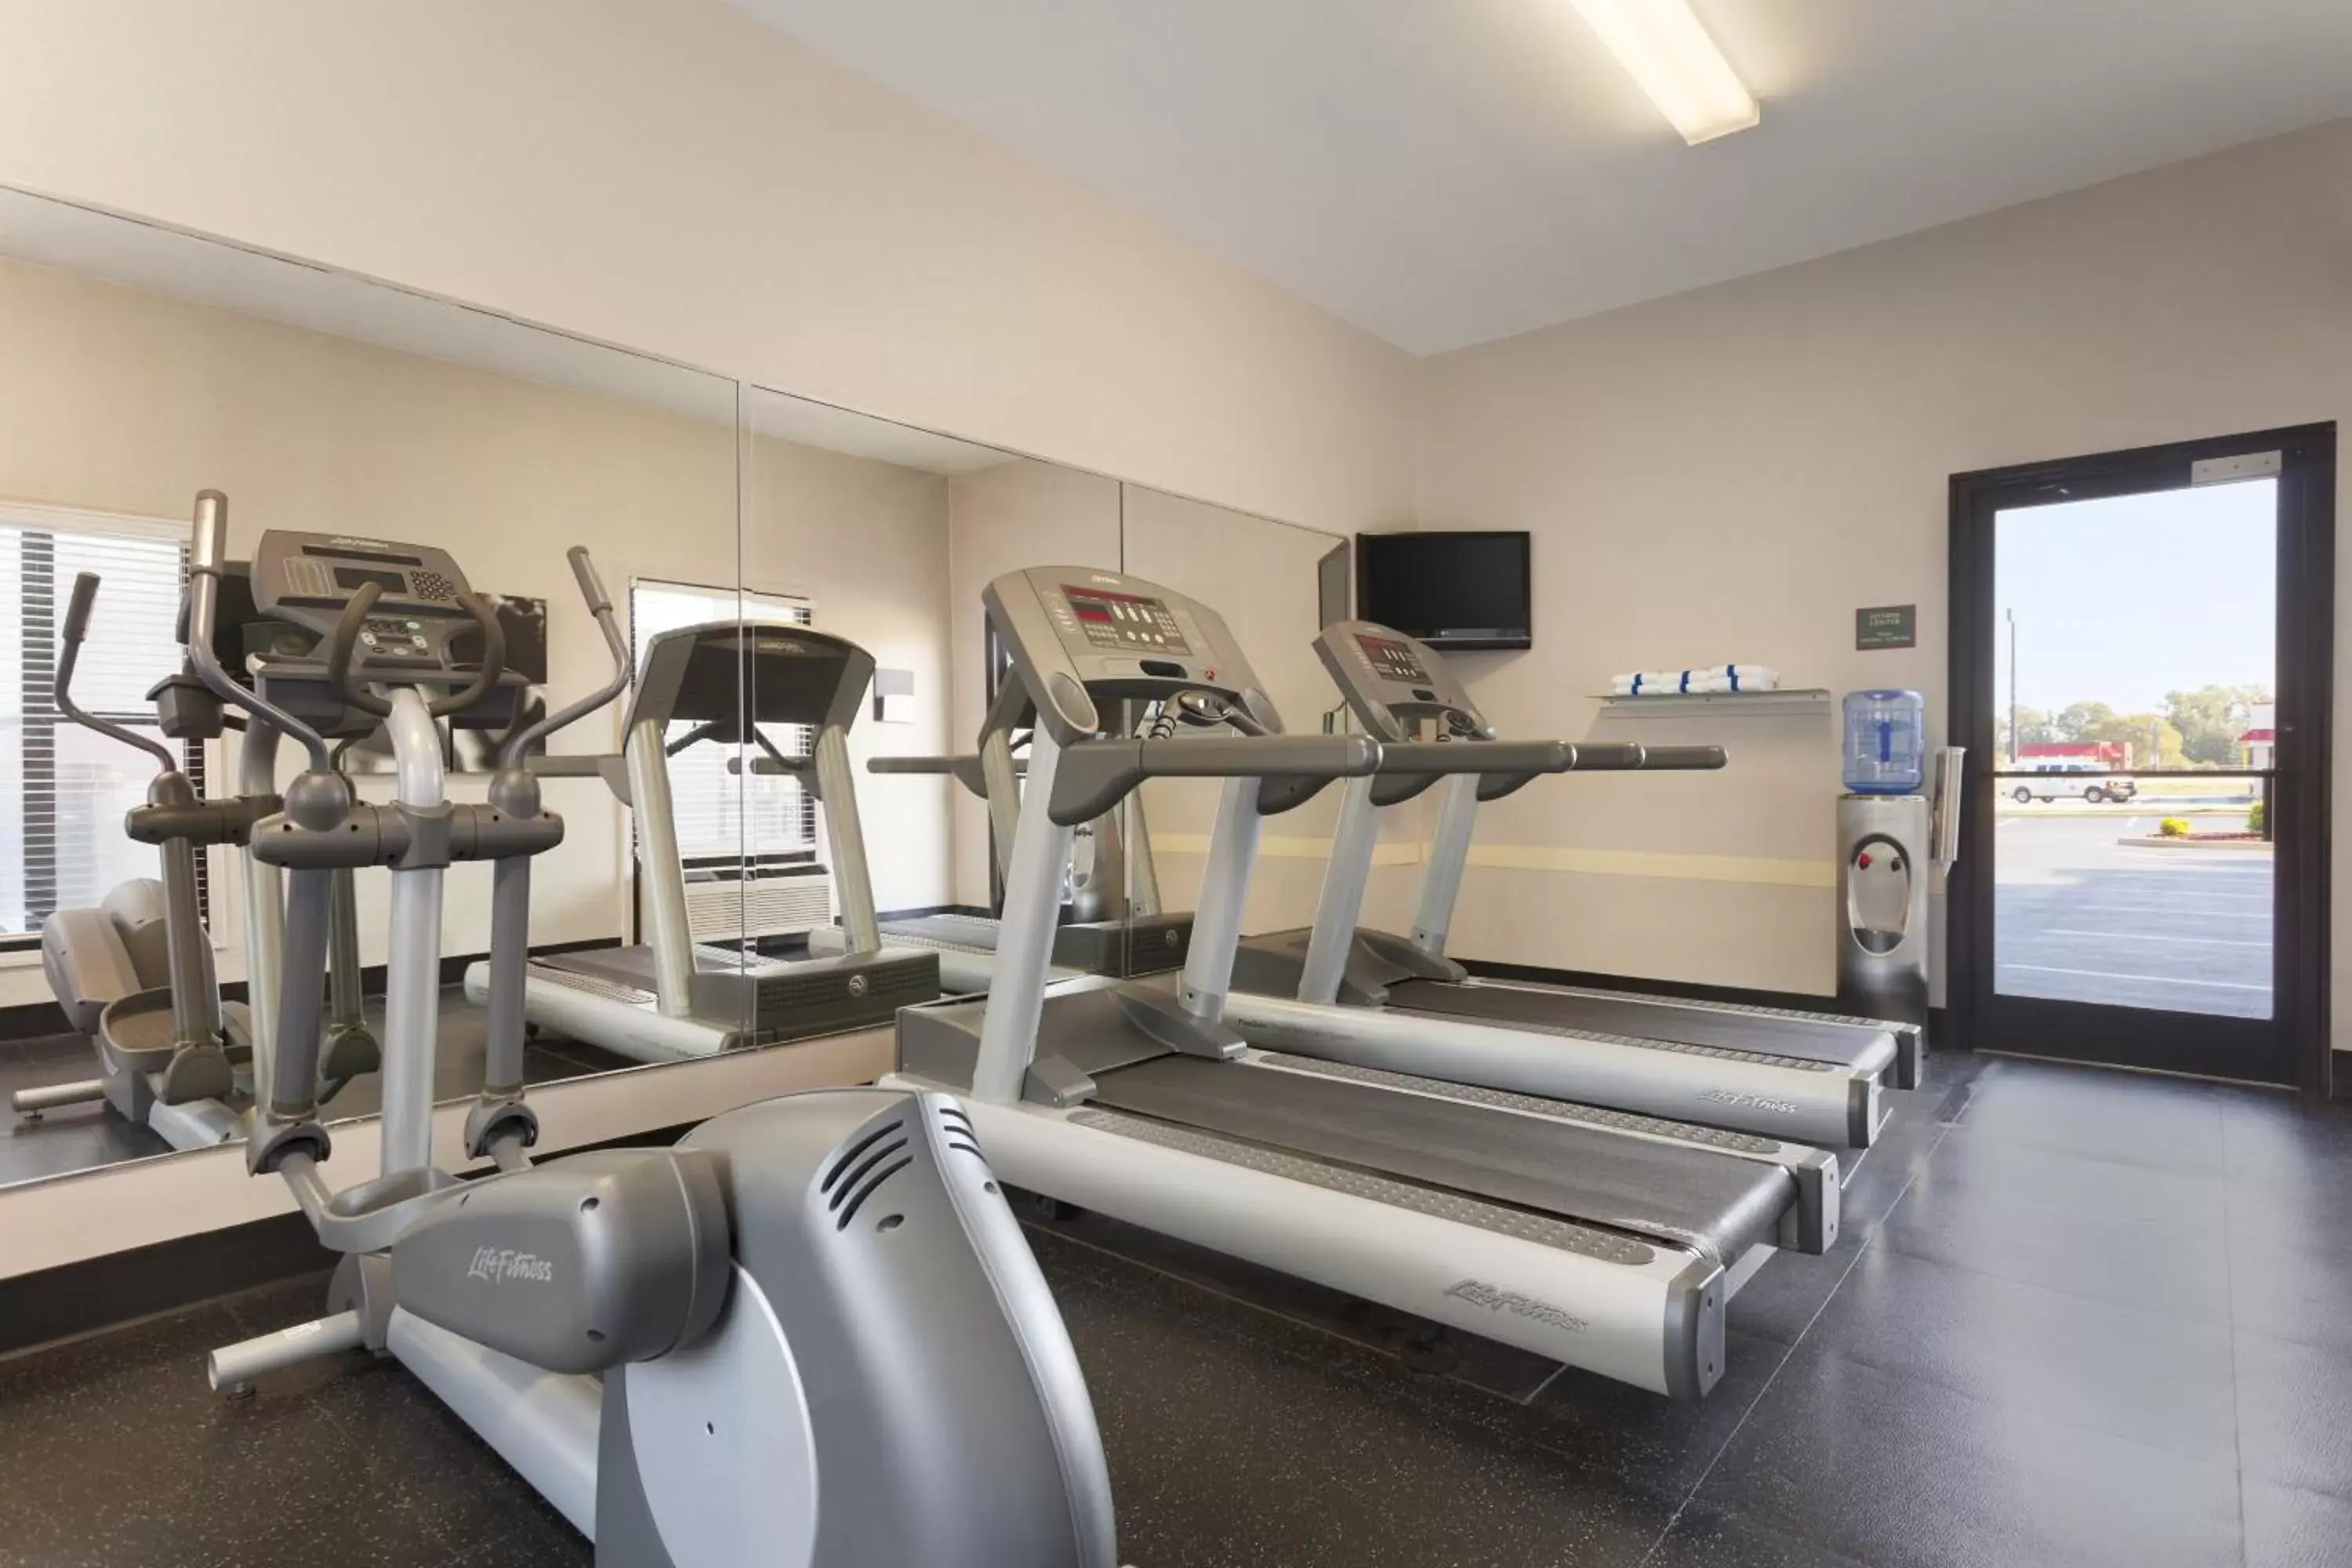 Fitness centre/facilities, Fitness Center/Facilities in Country Inn & Suites by Radisson, Florence, SC